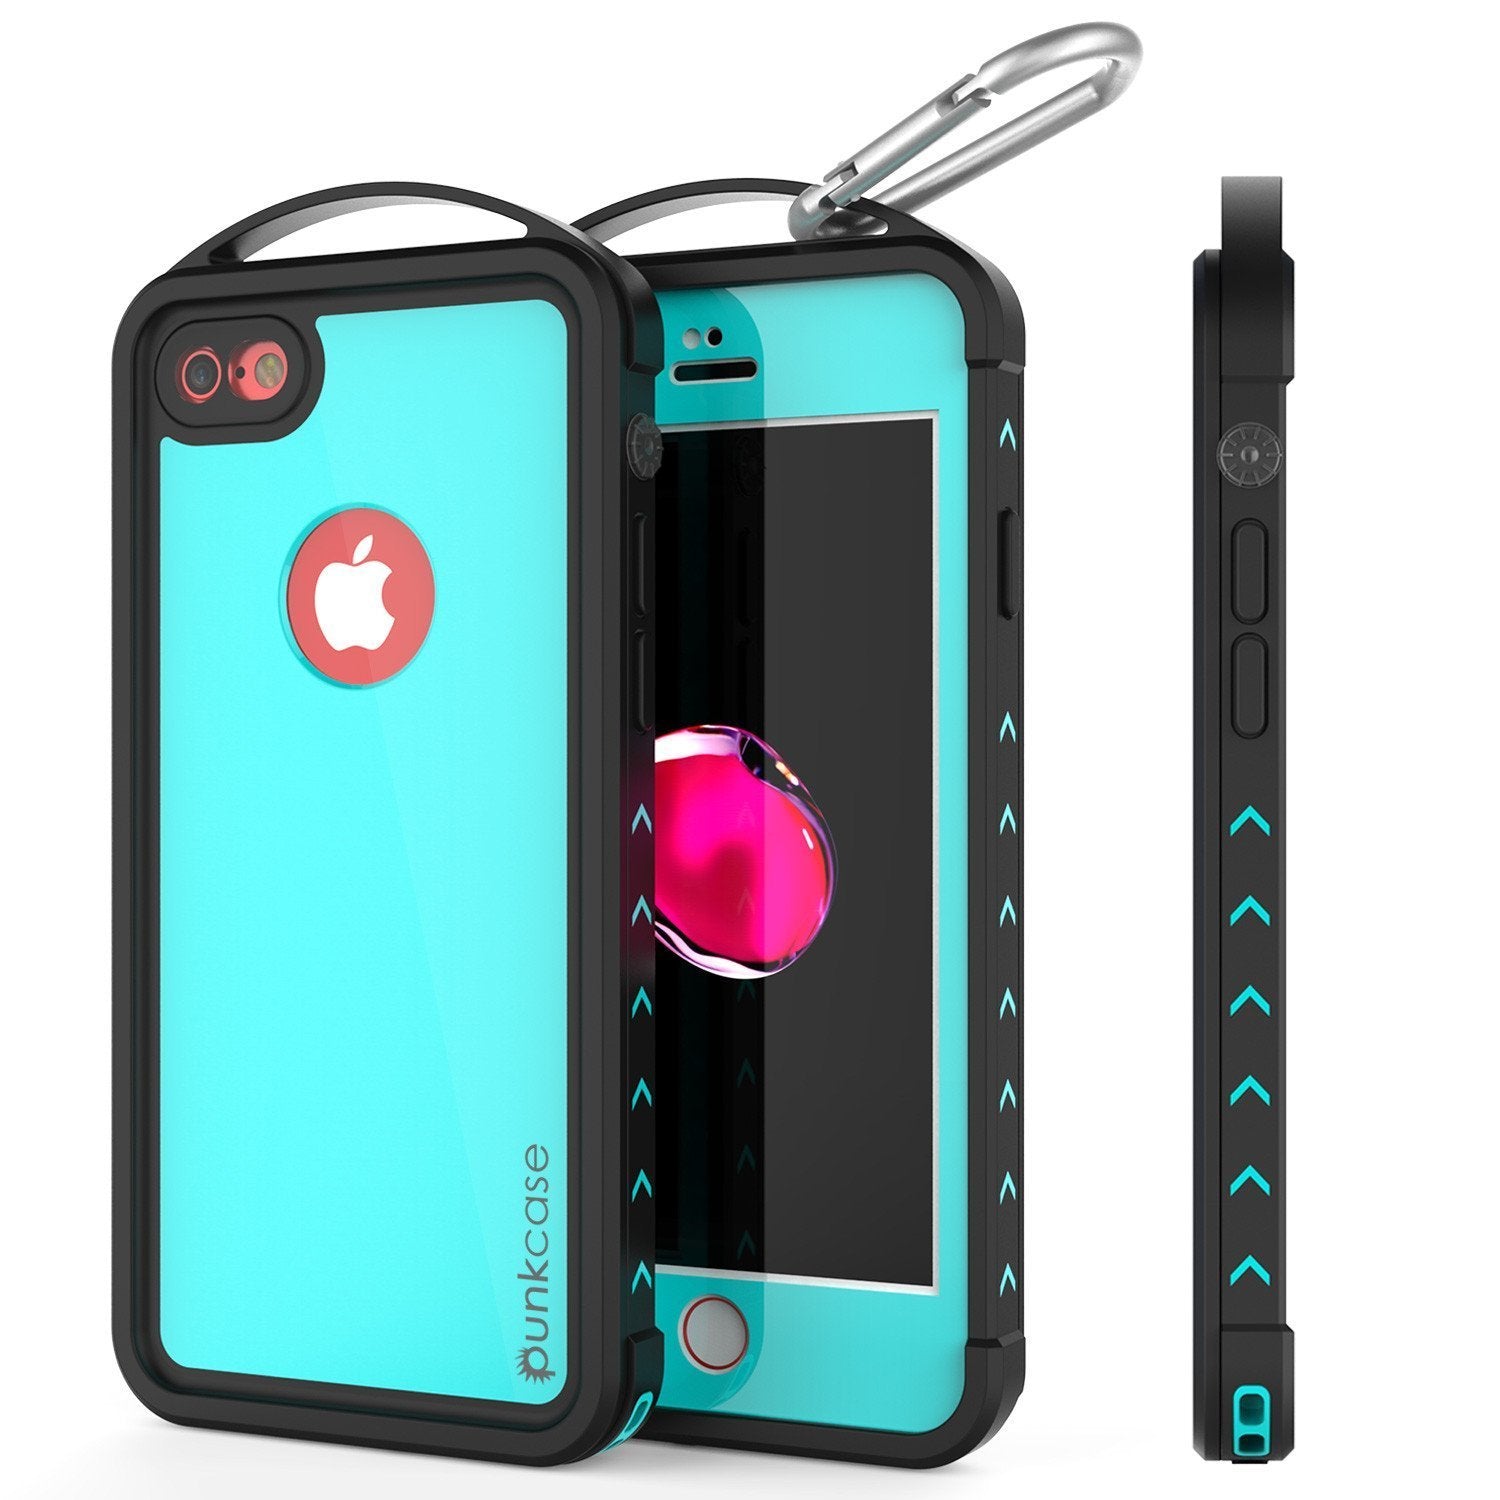 iPhone SE (4.7") Waterproof Case, Punkcase ALPINE Series, Teal | Heavy Duty Armor Cover (Color in image: teal)